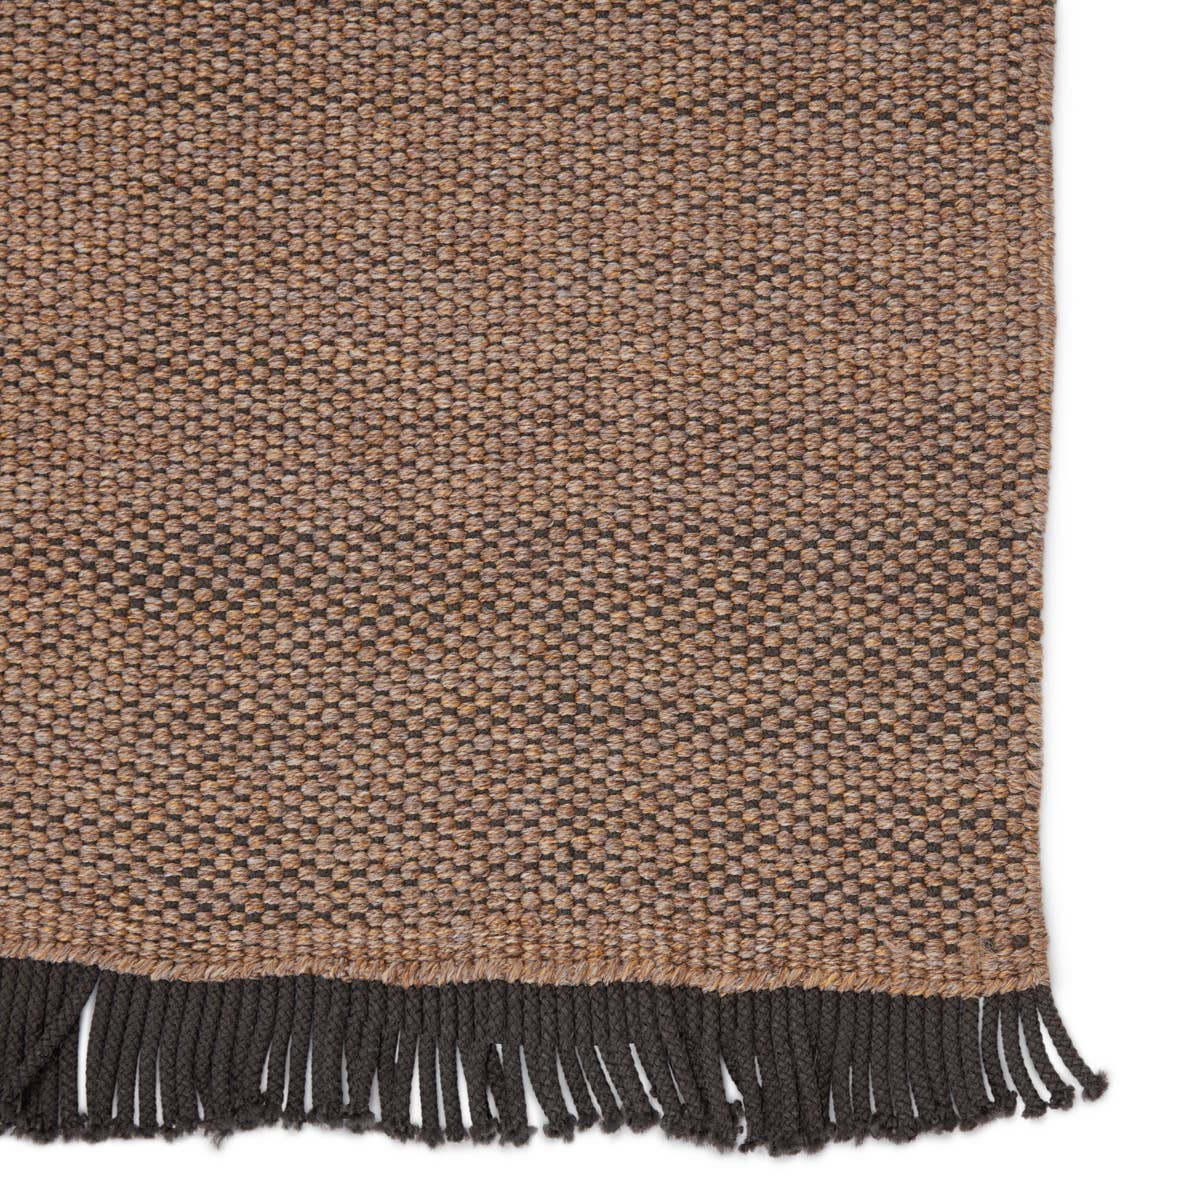 The Jaipur living Sonder Savvy Area Rug, or SOD01, offers a solid, basic design with natural-inspired texture that works for both indoor and outdoor spaces.  This rug features a durable, easy-to-clean polypropylene construction with distinctive corded fringe trim for a textural twist.